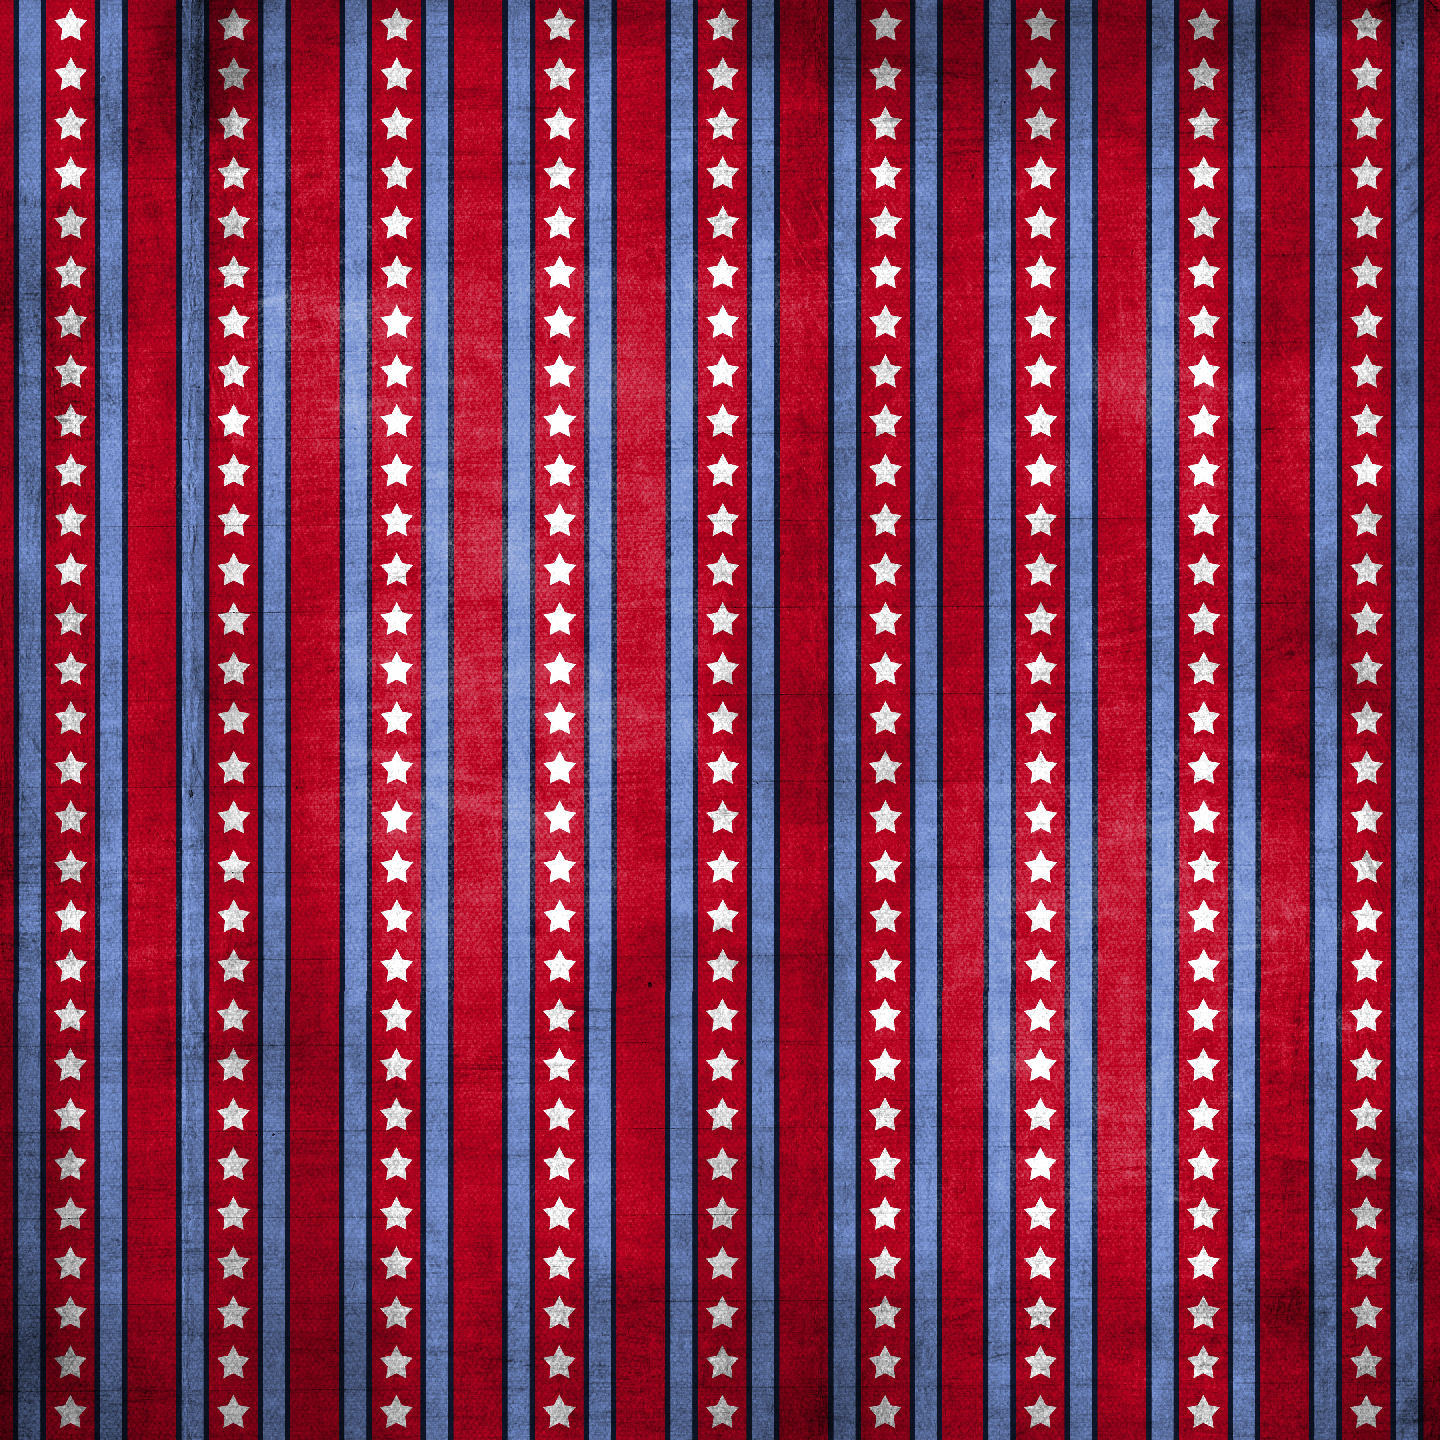 Stars And Stripes Backgrounds Stars And Stripes